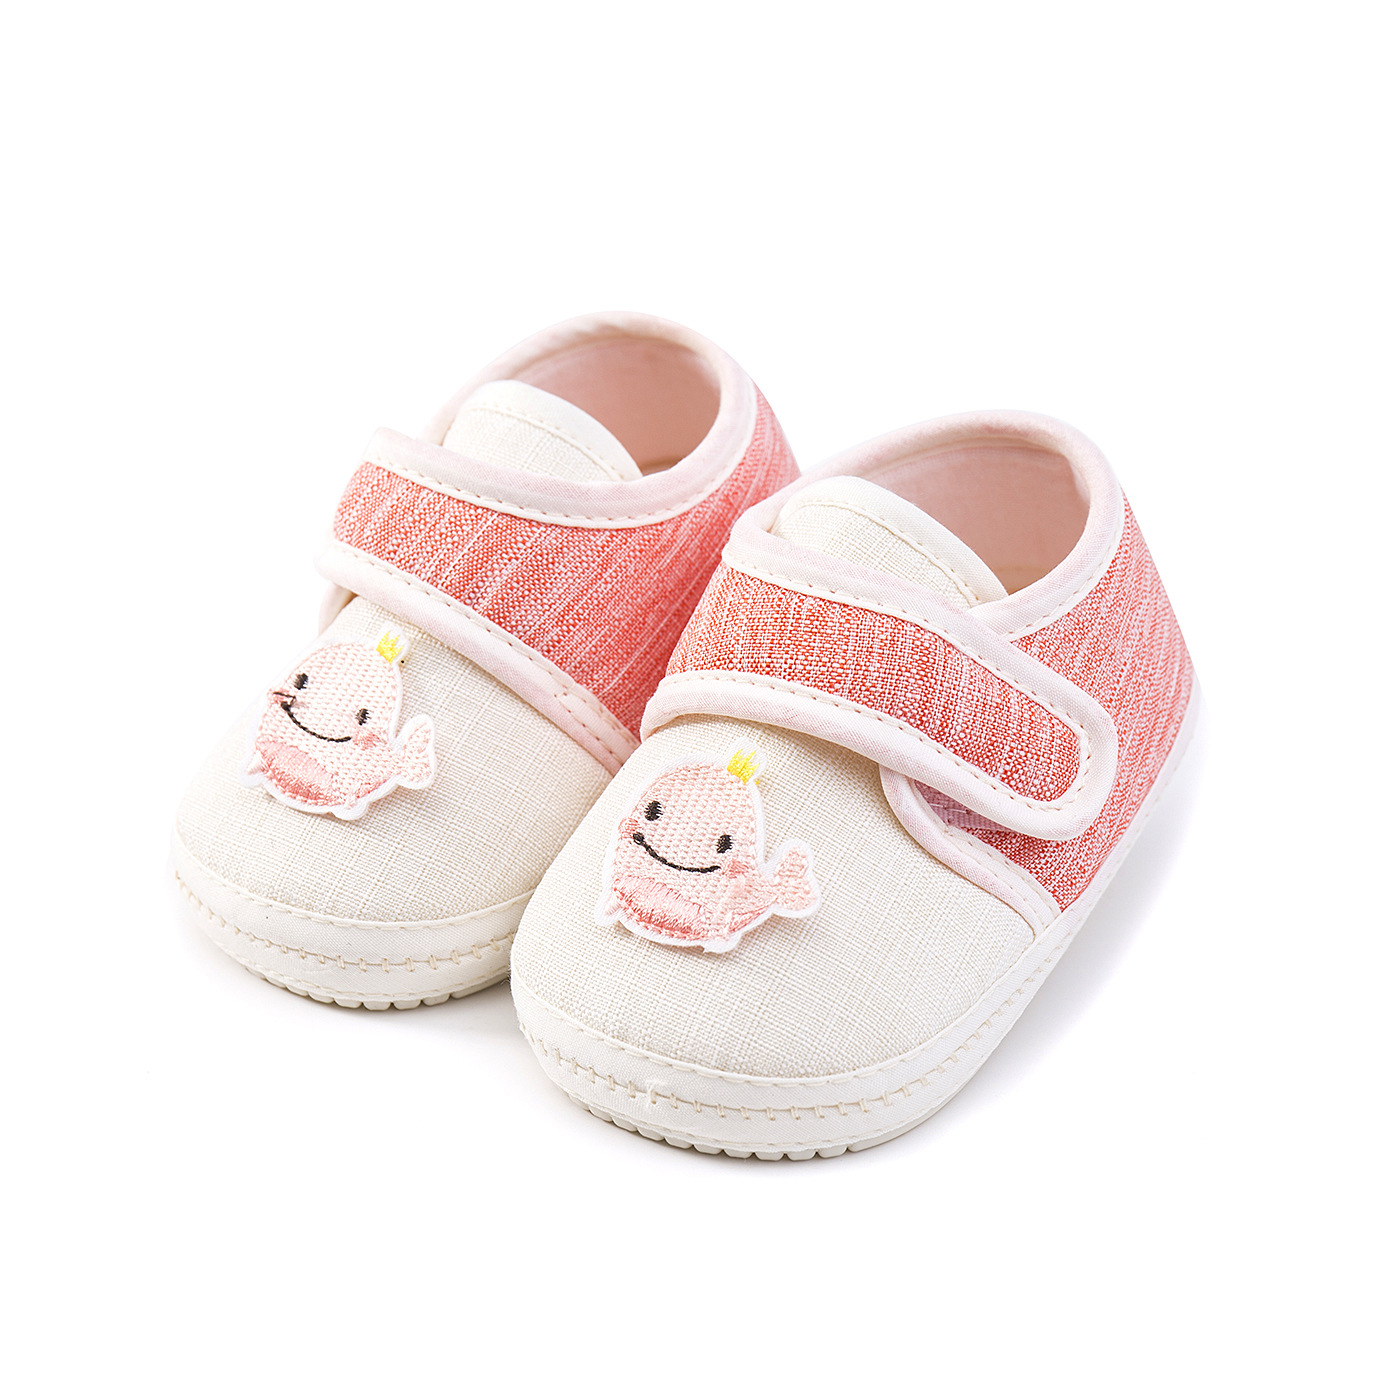 Baby Toddler Shoes Soft Bottom Summer Tight Shoes Men's and Women's Baby Shoes Newborn Eight Months Nine Months Ten Months